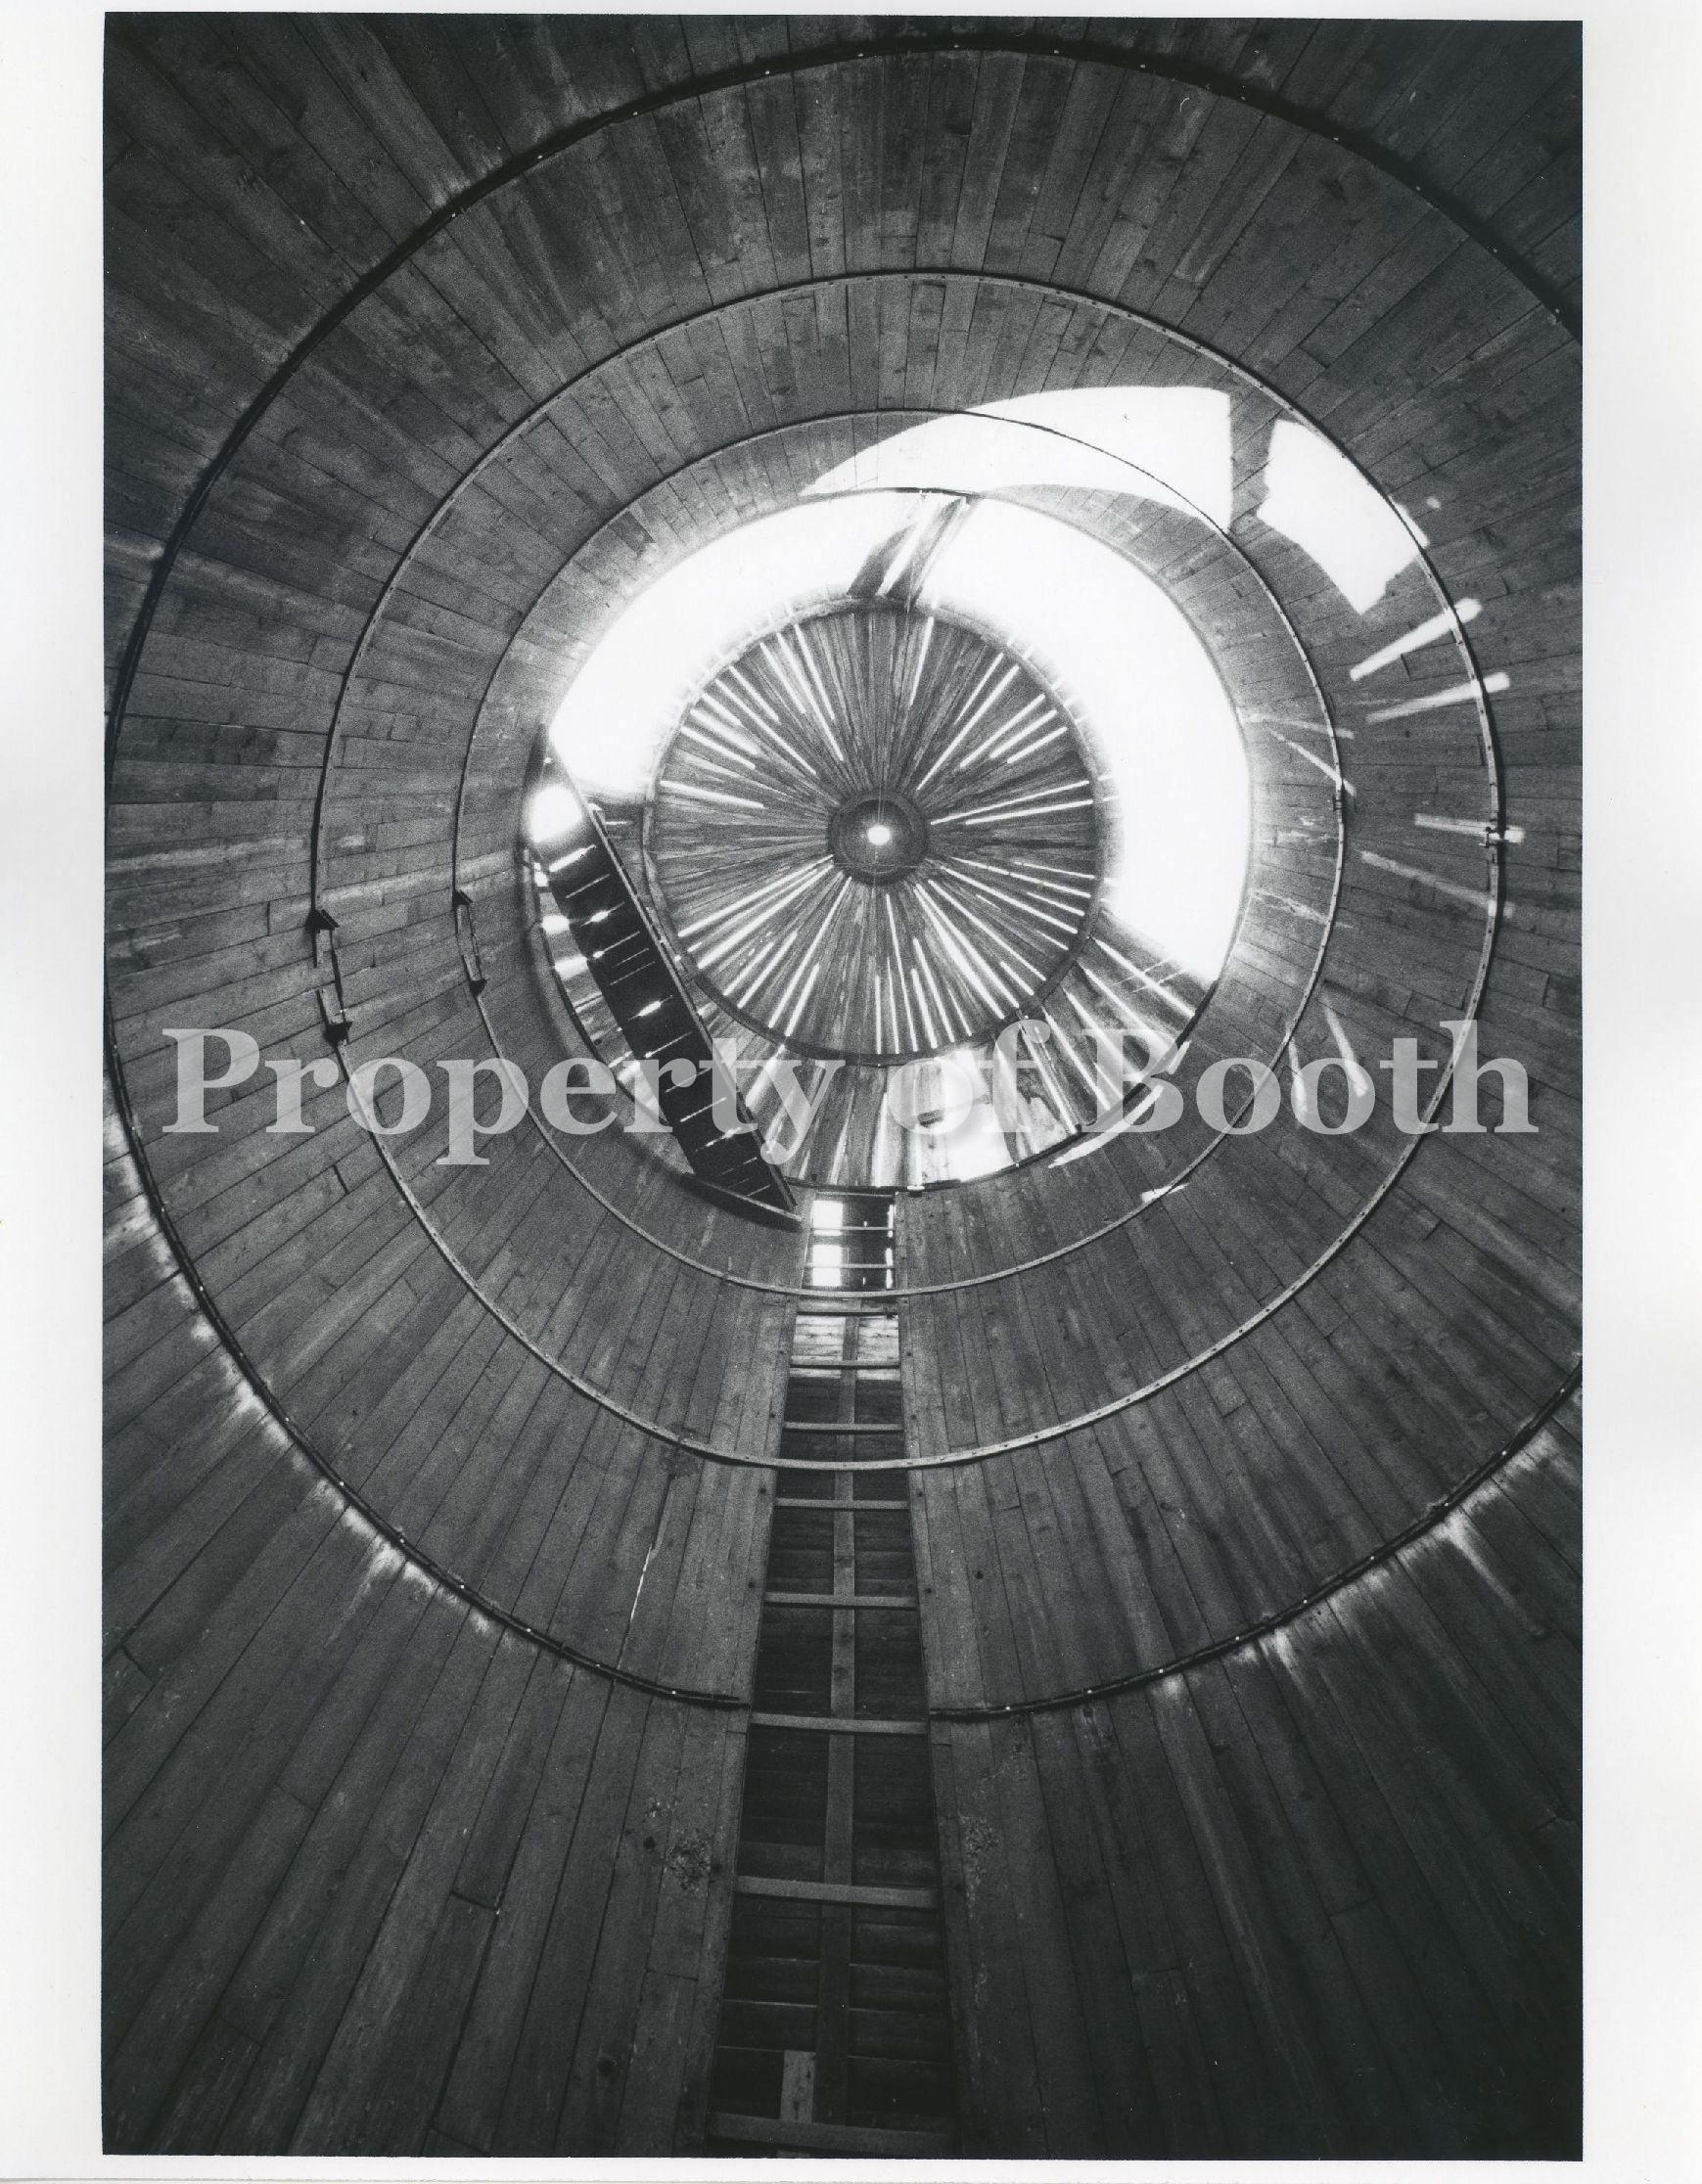 ©  Richard S. Buswell, Silo, 1996, Silver Gelatin Print, 20" x 16", Gift of the Artist